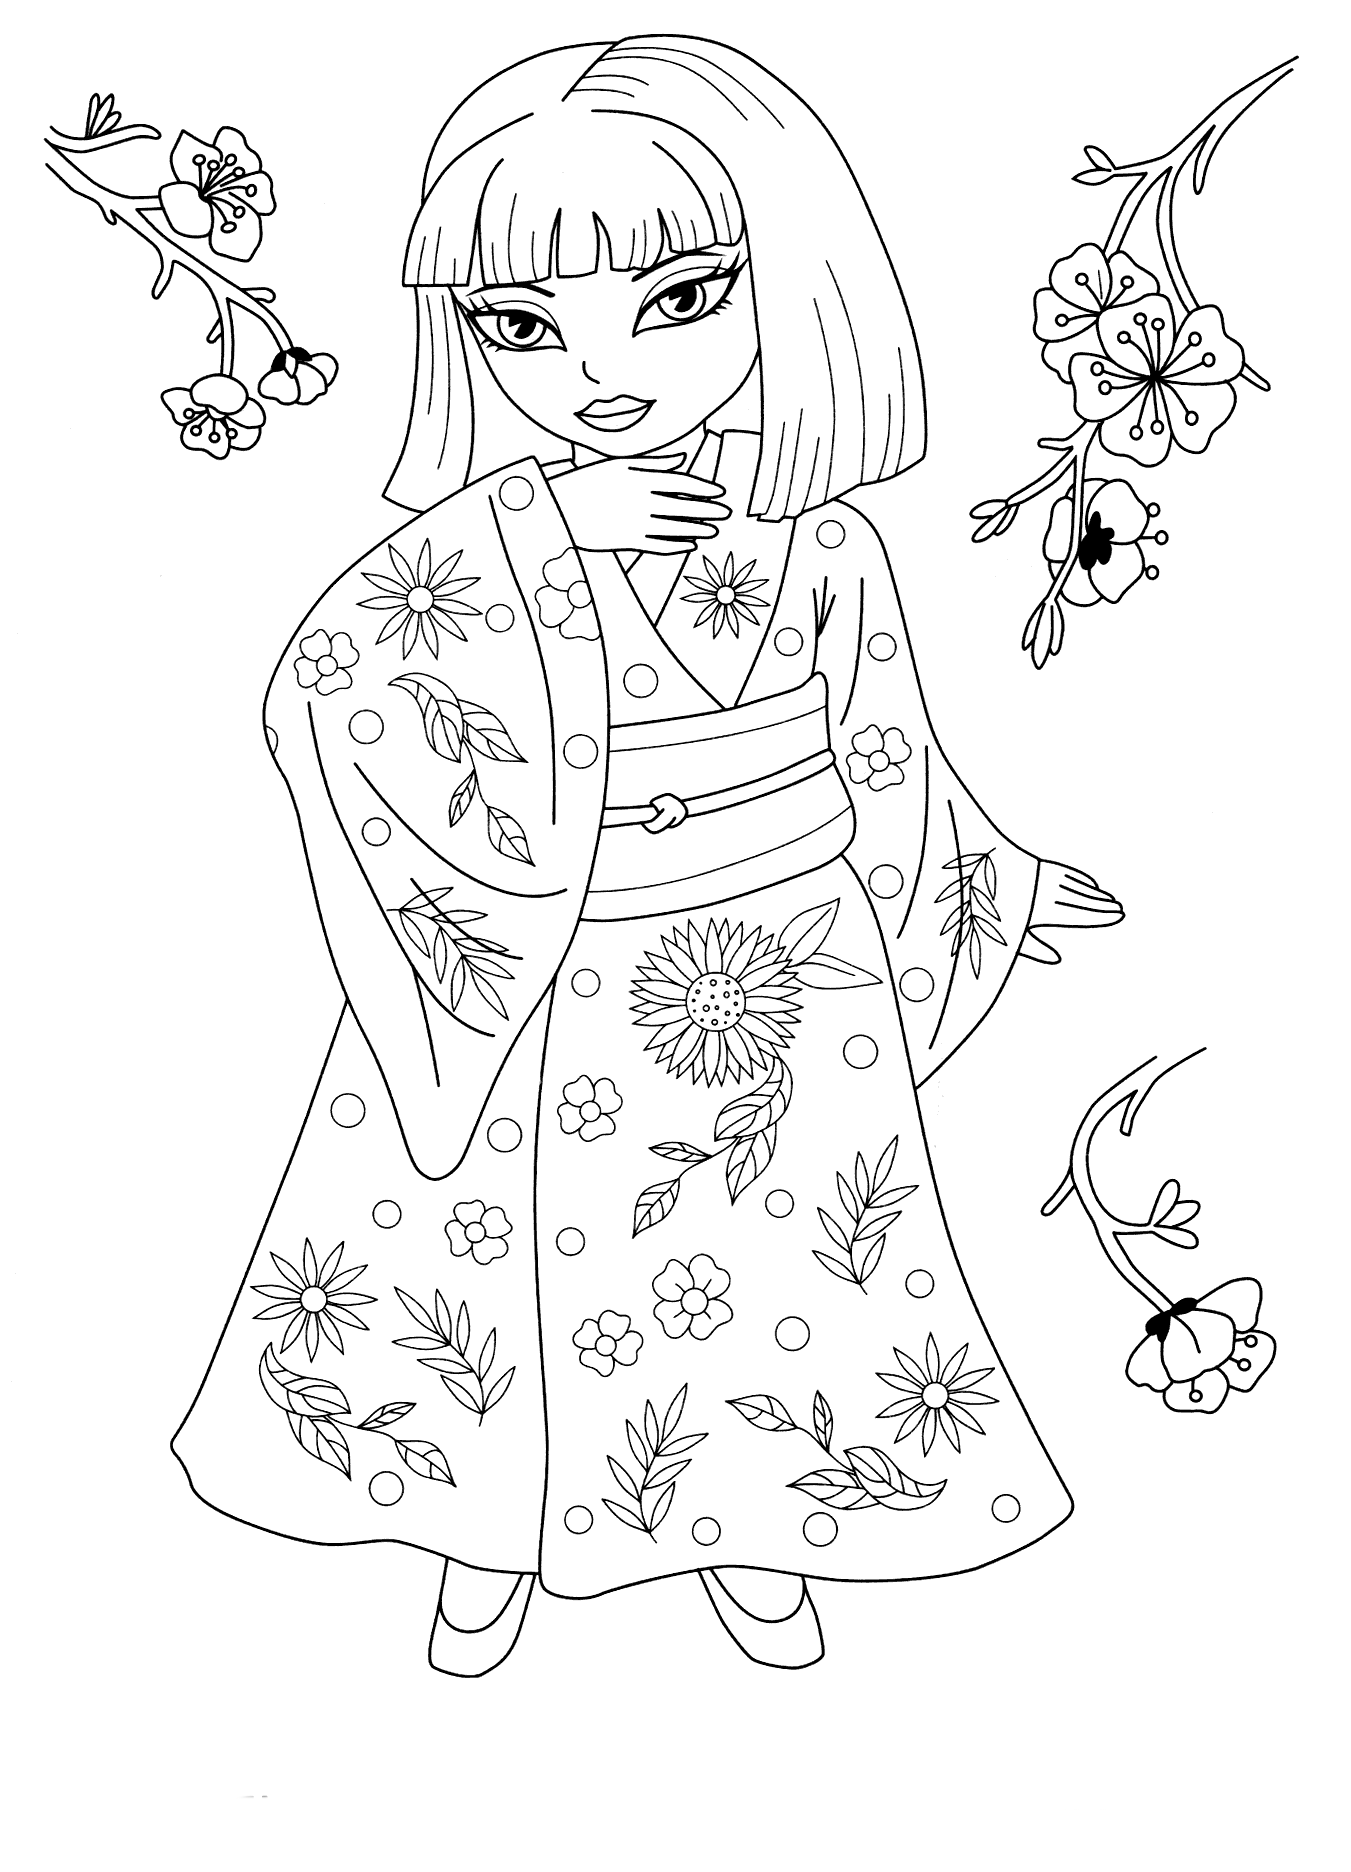 Coloring page - Princess from Japan